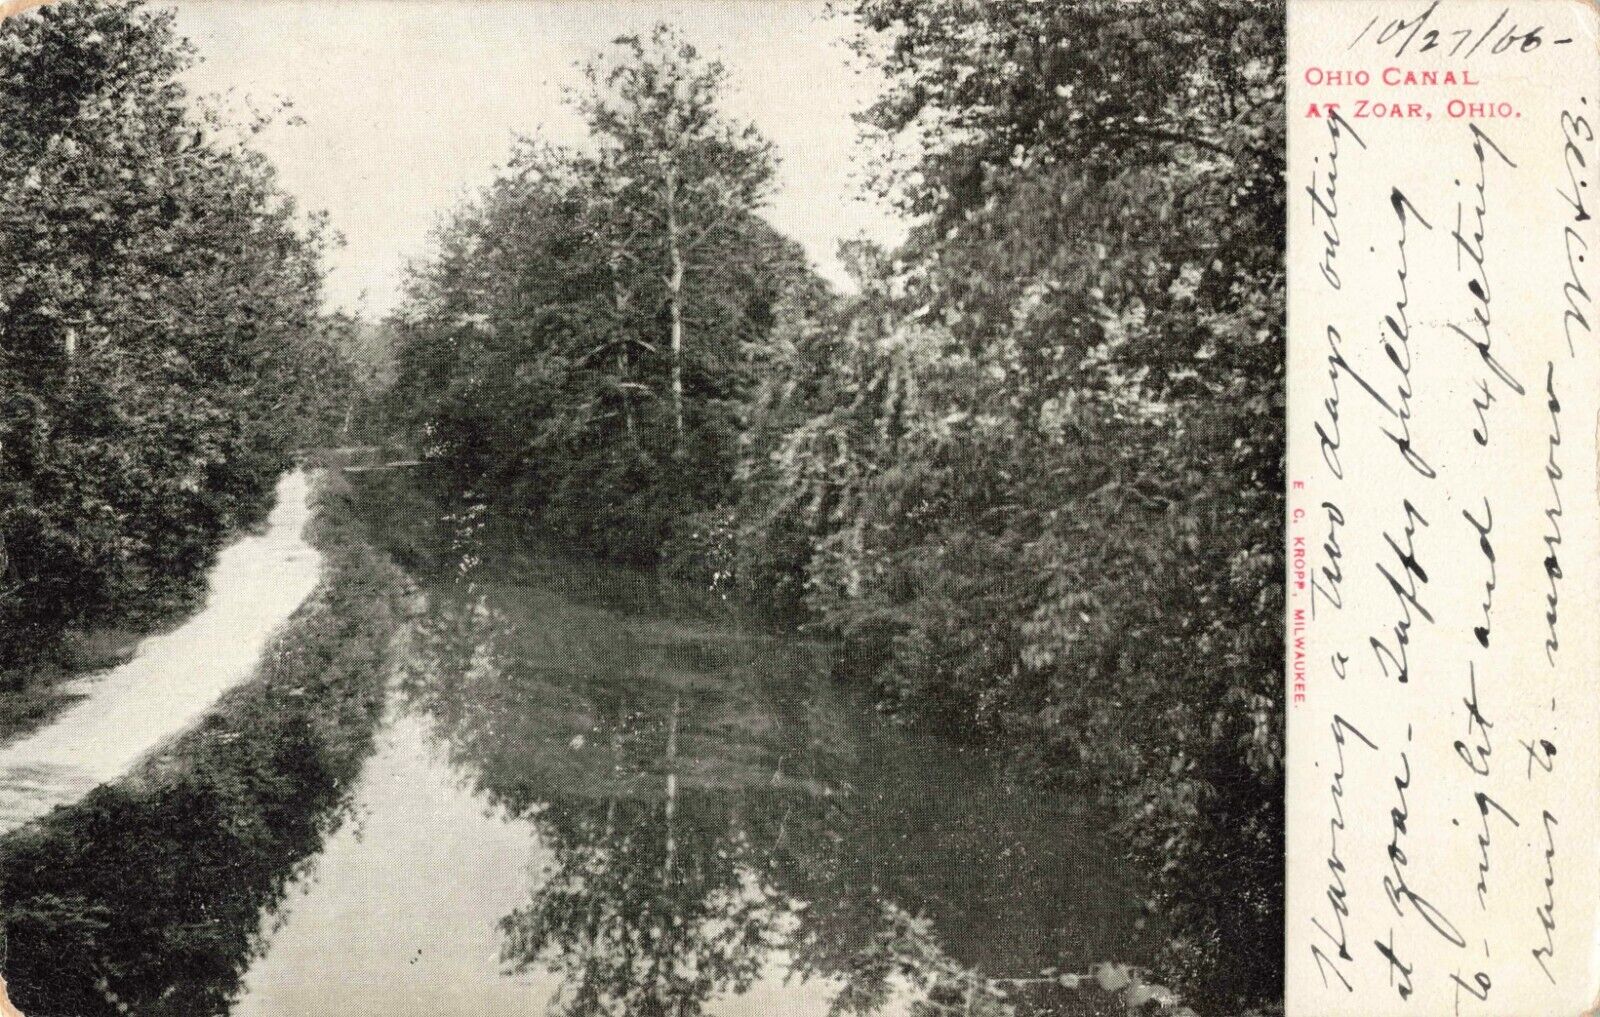 Ohio Canal at Zoar, Ohio OH - 1906 Vintage Postcard